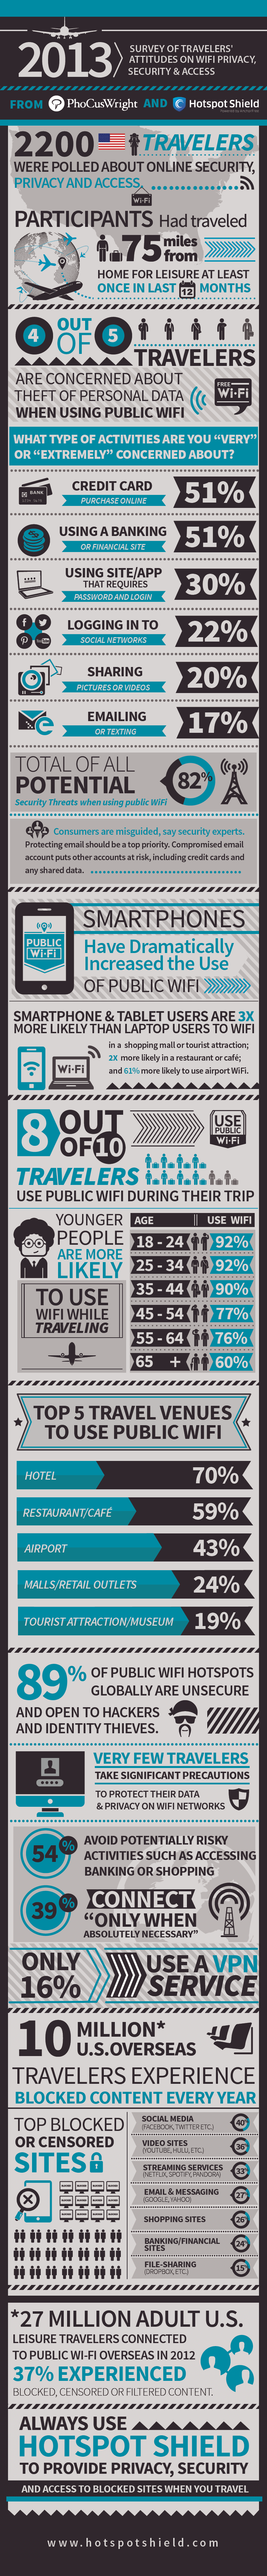 Anchorfree's survey of travelers' attitudes on WiFi security, privacy, and access